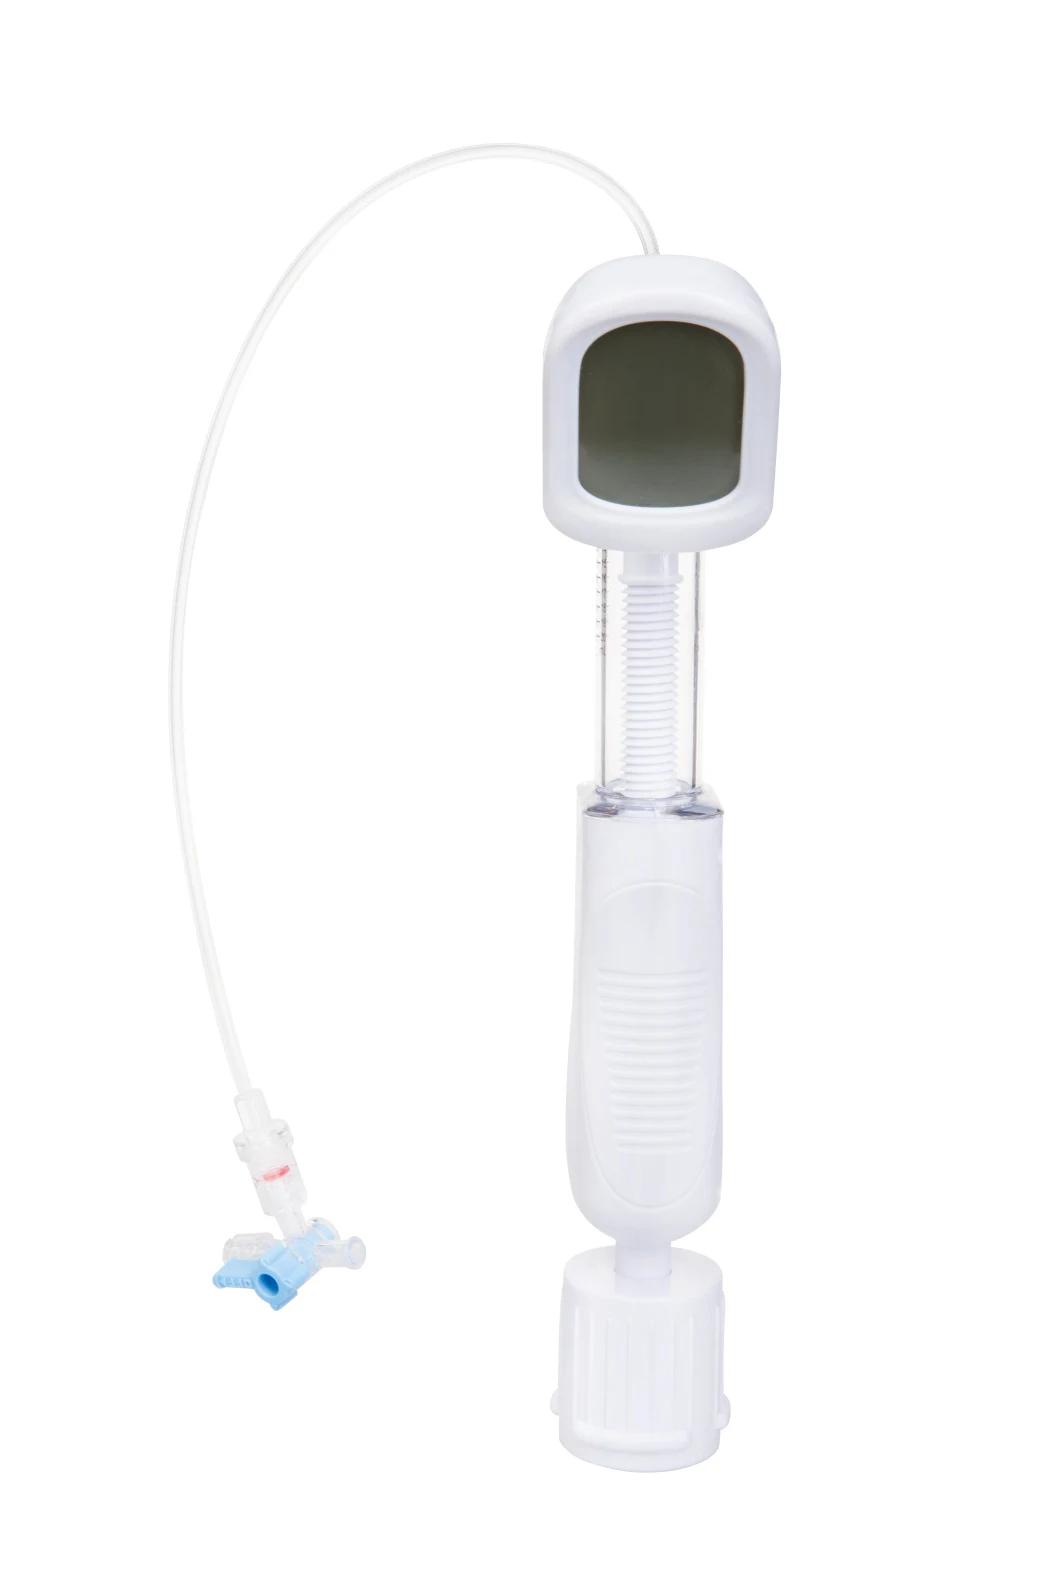 Balloon Catheter Digital Inflation Device with Ce FDA Cfda